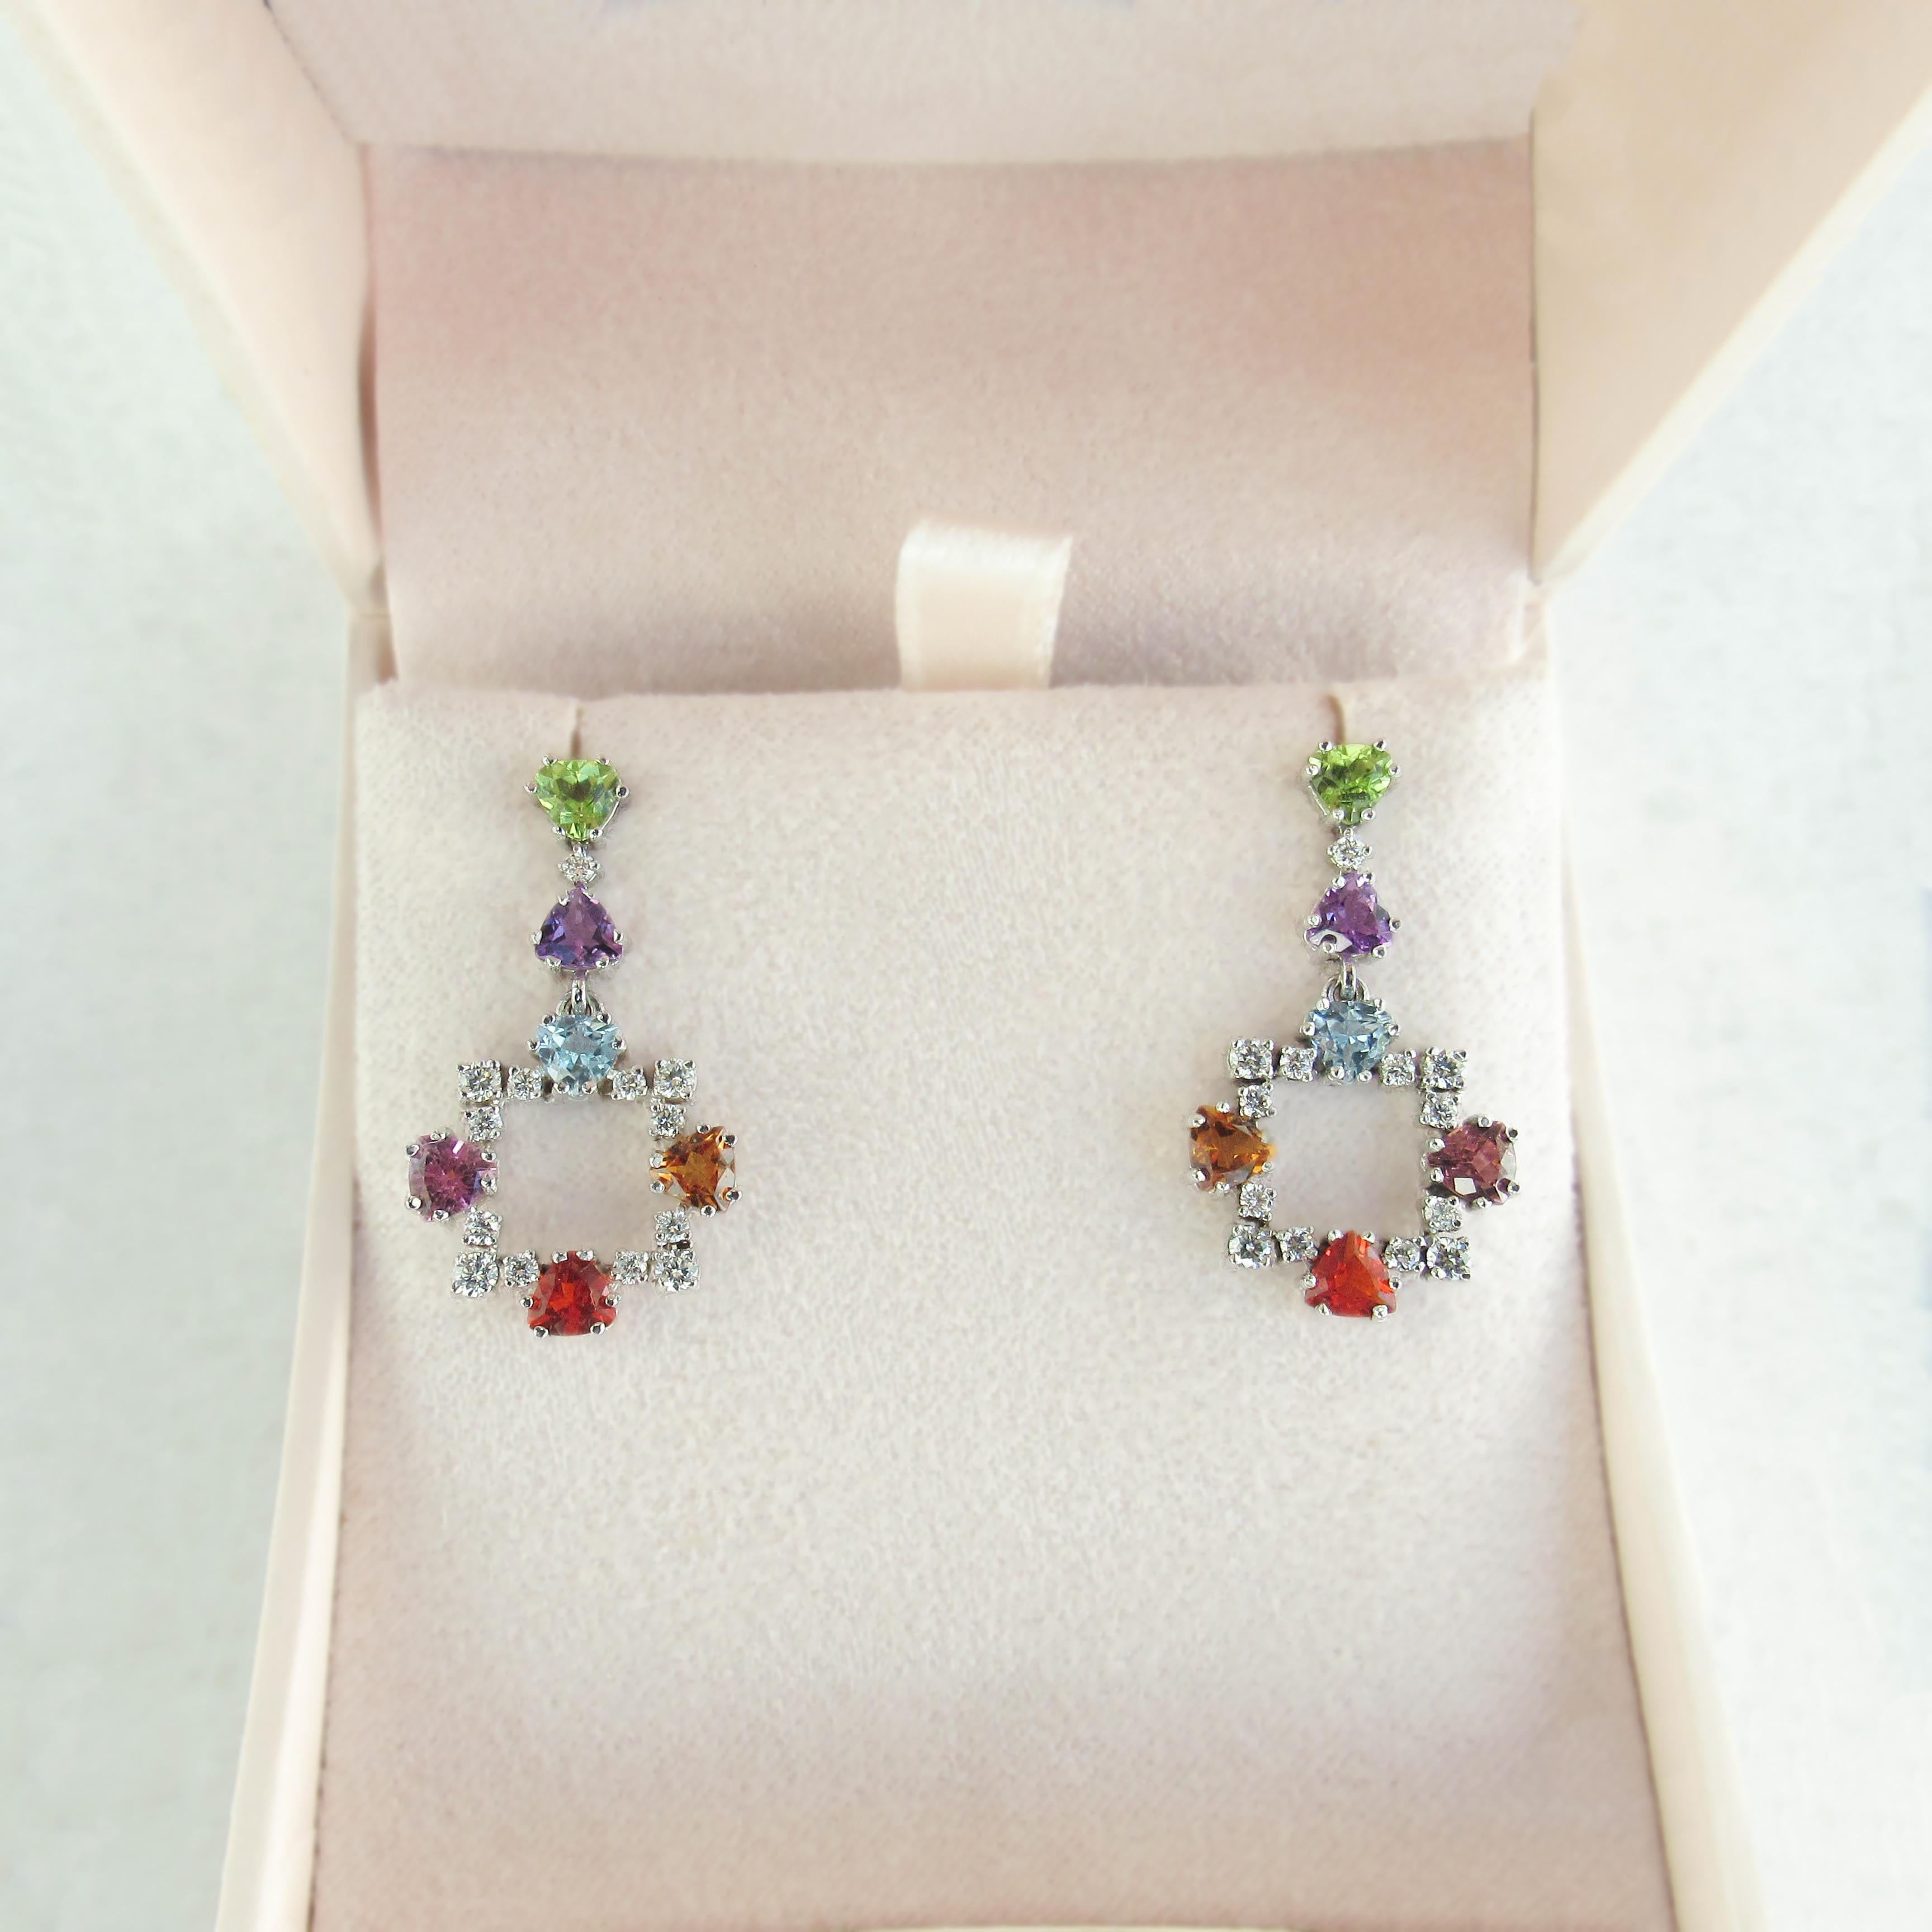 14 Karat White Gold Earrings with Diamonds and Multicolored Gemstones For Sale 2